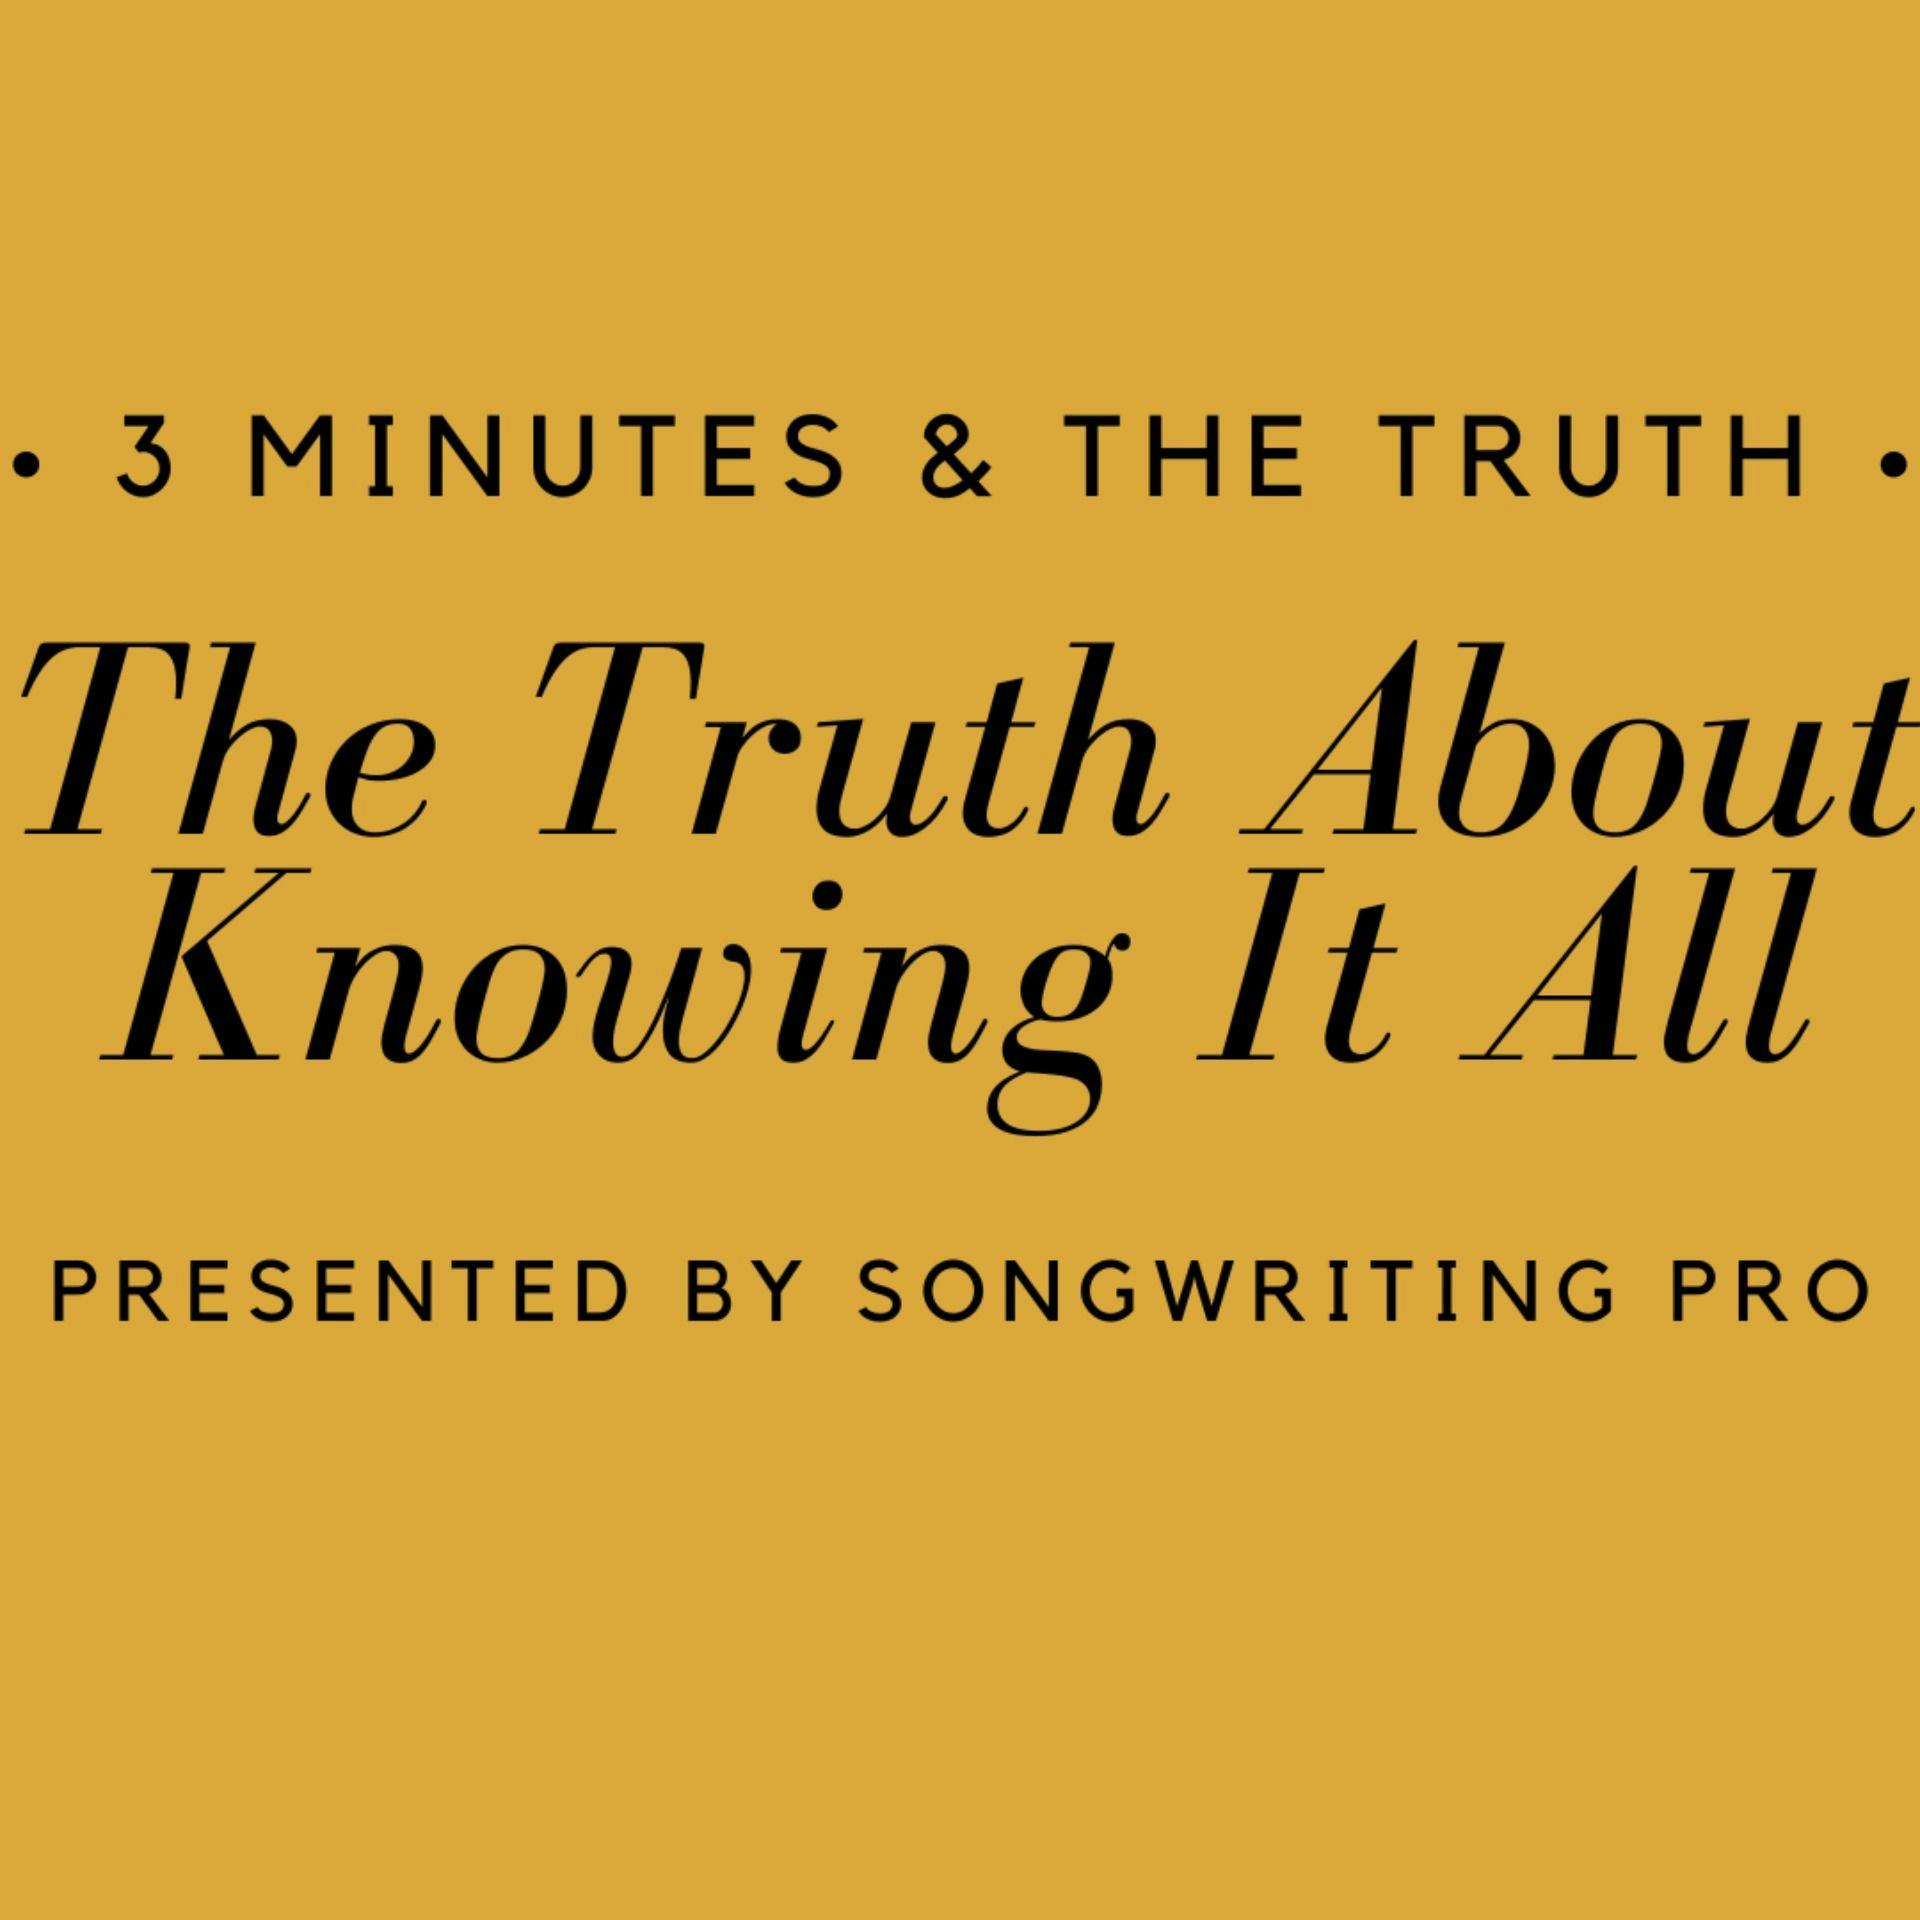 3 Minutes & The Truth #2: The Truth About Knowing It All